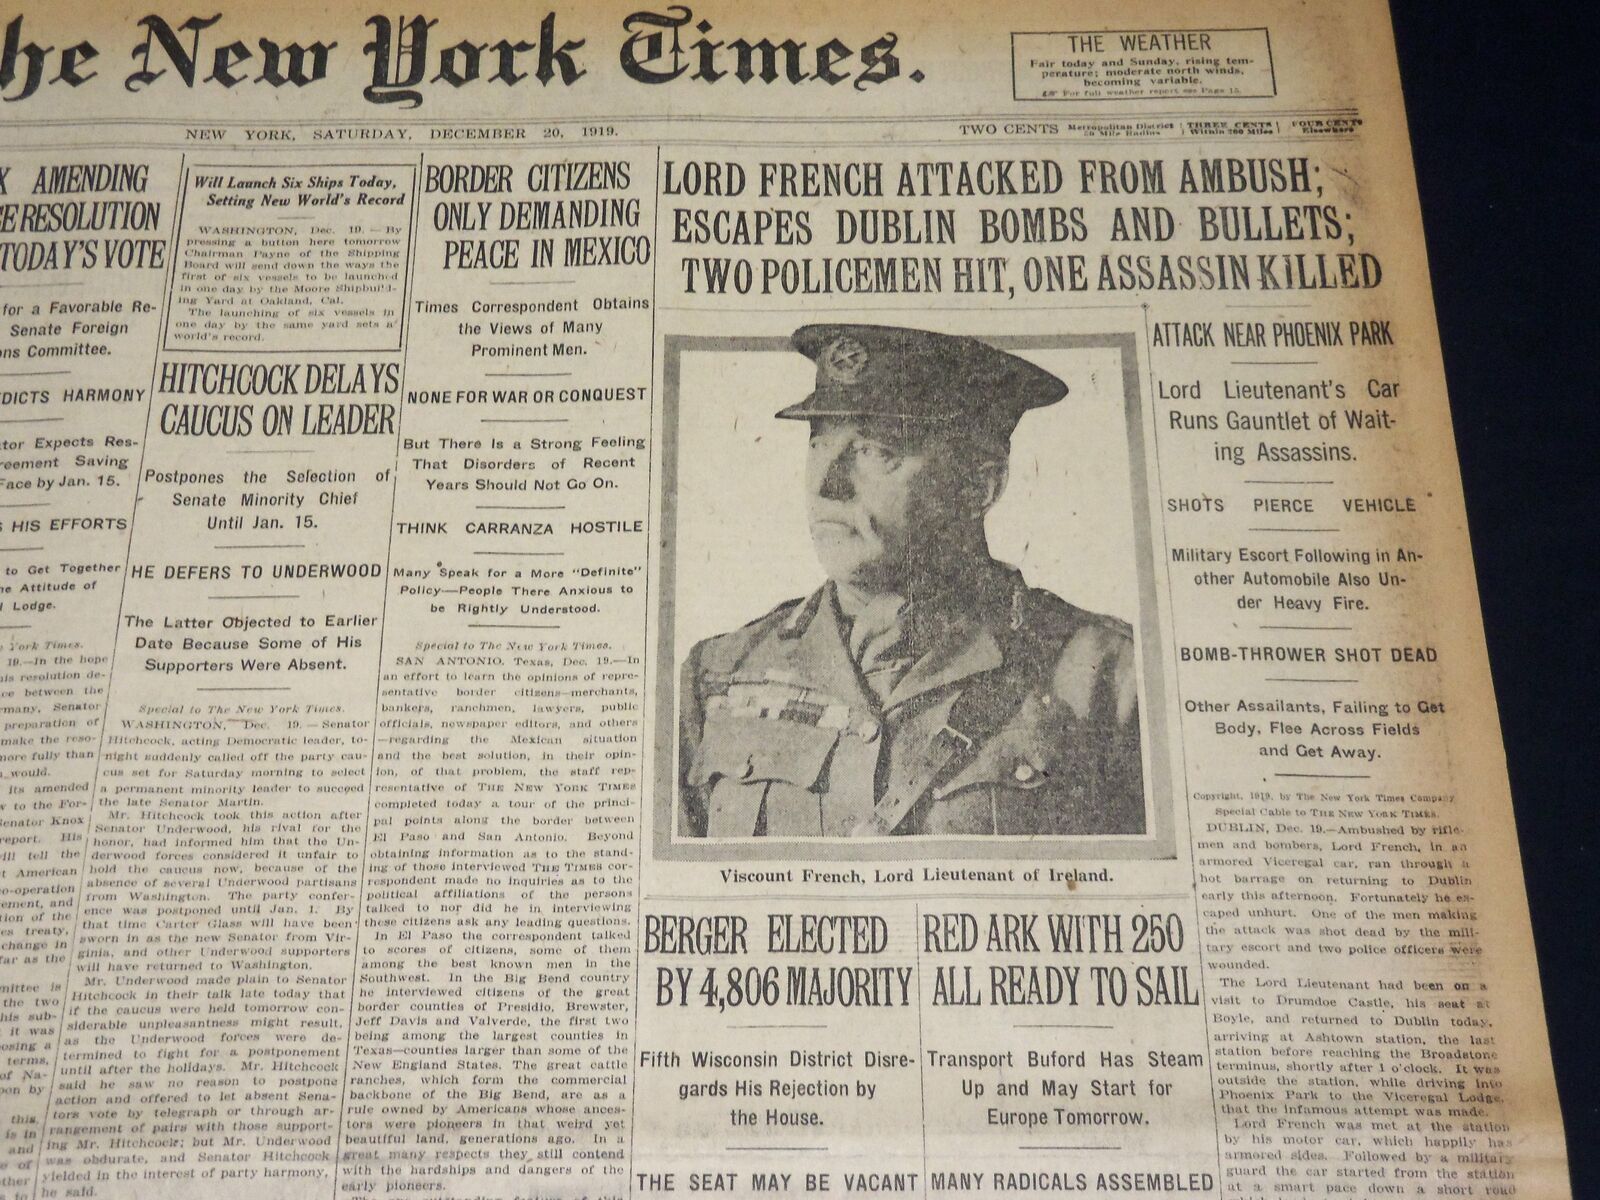 1919 DECEMBER 20 NEW YORK TIMES - LORD FRENCH ATTACKED FROM AMBUSH - NT 8537